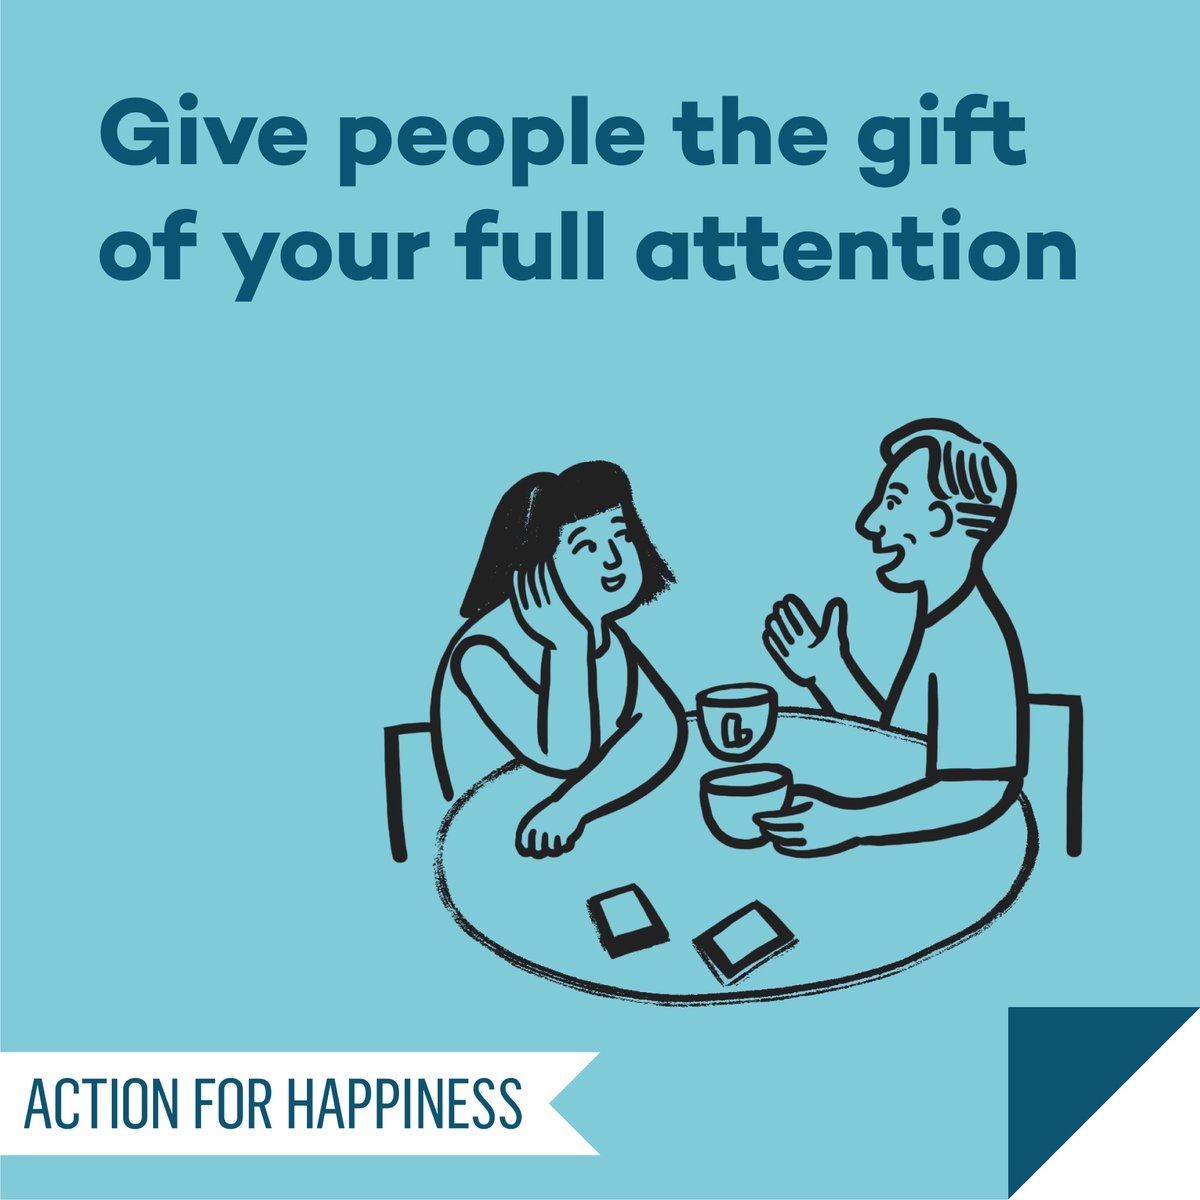 Altruistic August - Day 22: Give people the gift of your full attention actionforhappiness.org/altruistic-aug… #AltruisticAugust